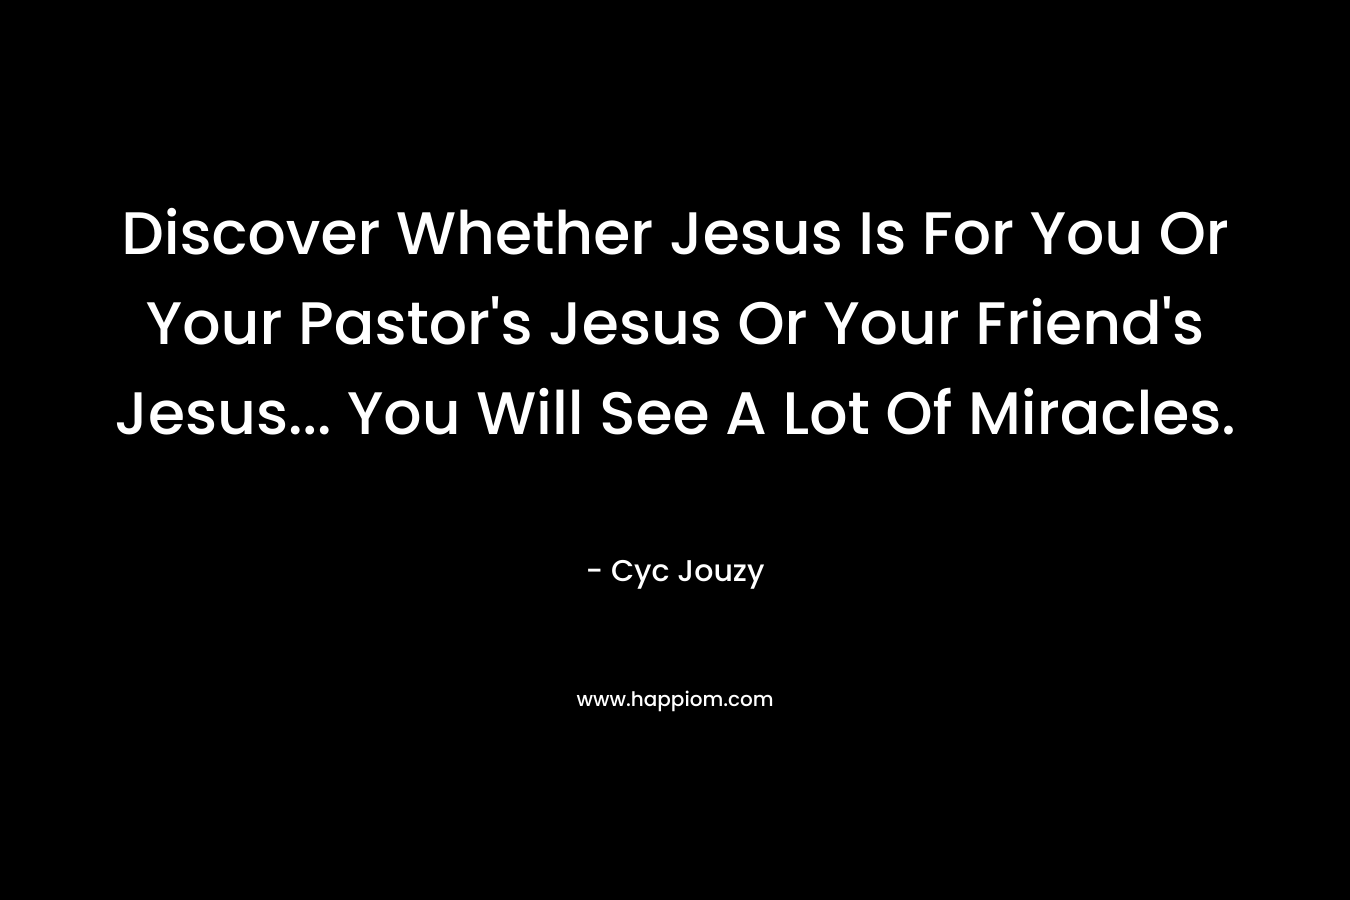 Discover Whether Jesus Is For You Or Your Pastor's Jesus Or Your Friend's Jesus... You Will See A Lot Of Miracles.